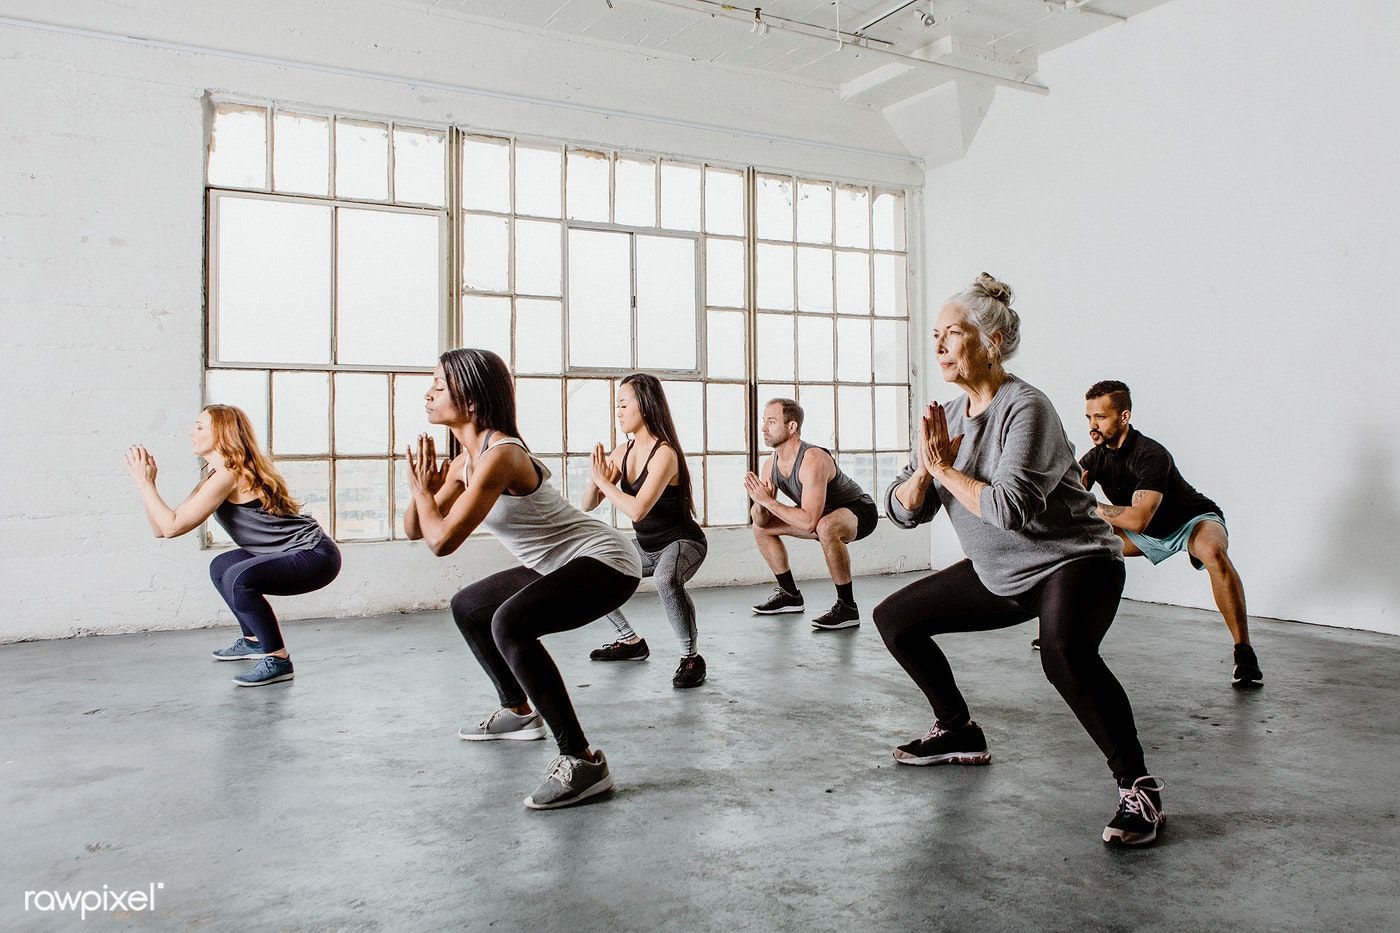 17 group fitness Photography ideas